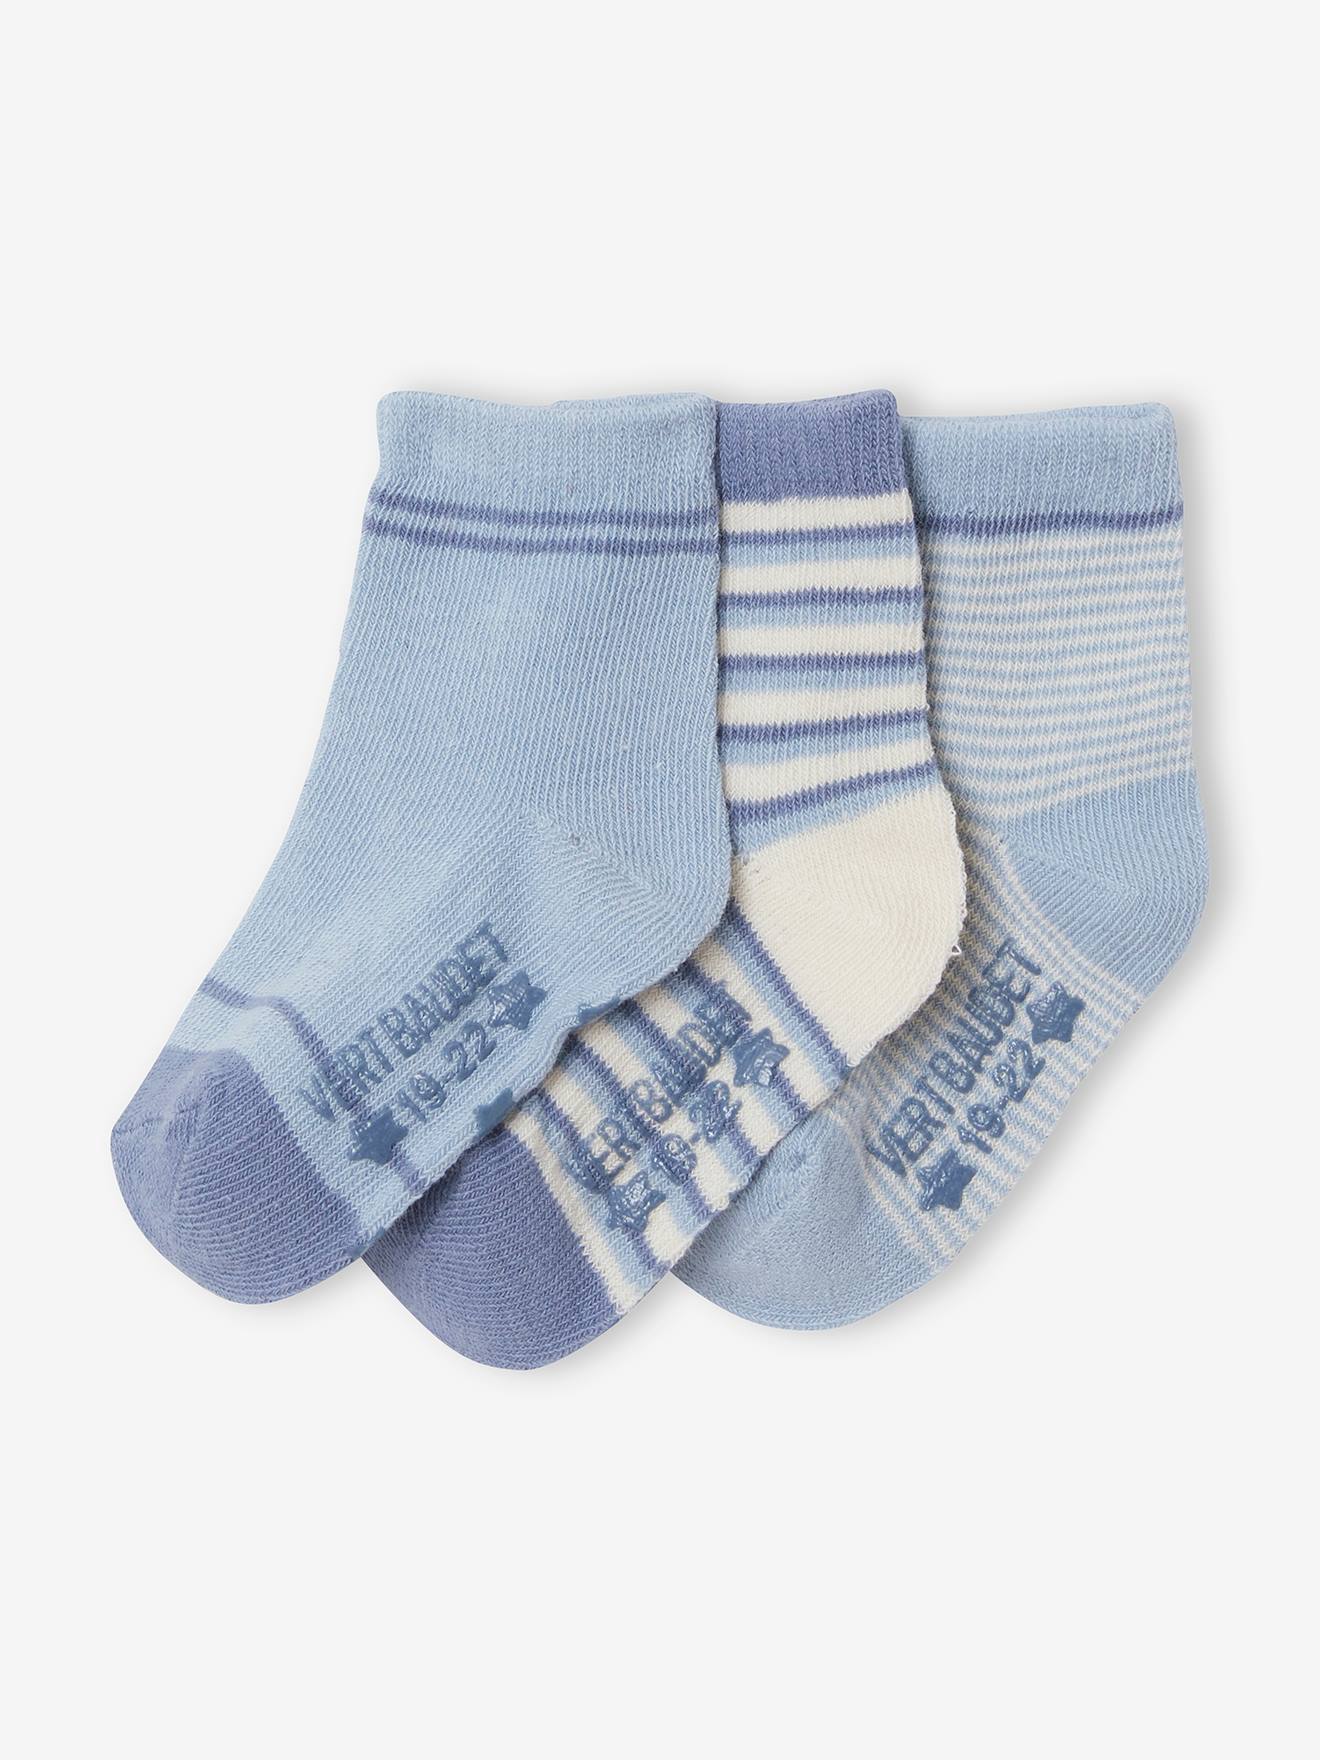 Baby Boys Toddlers 3-Pack Ankle Socks Trainer Socks Cotton Sizes 0-36 Months 